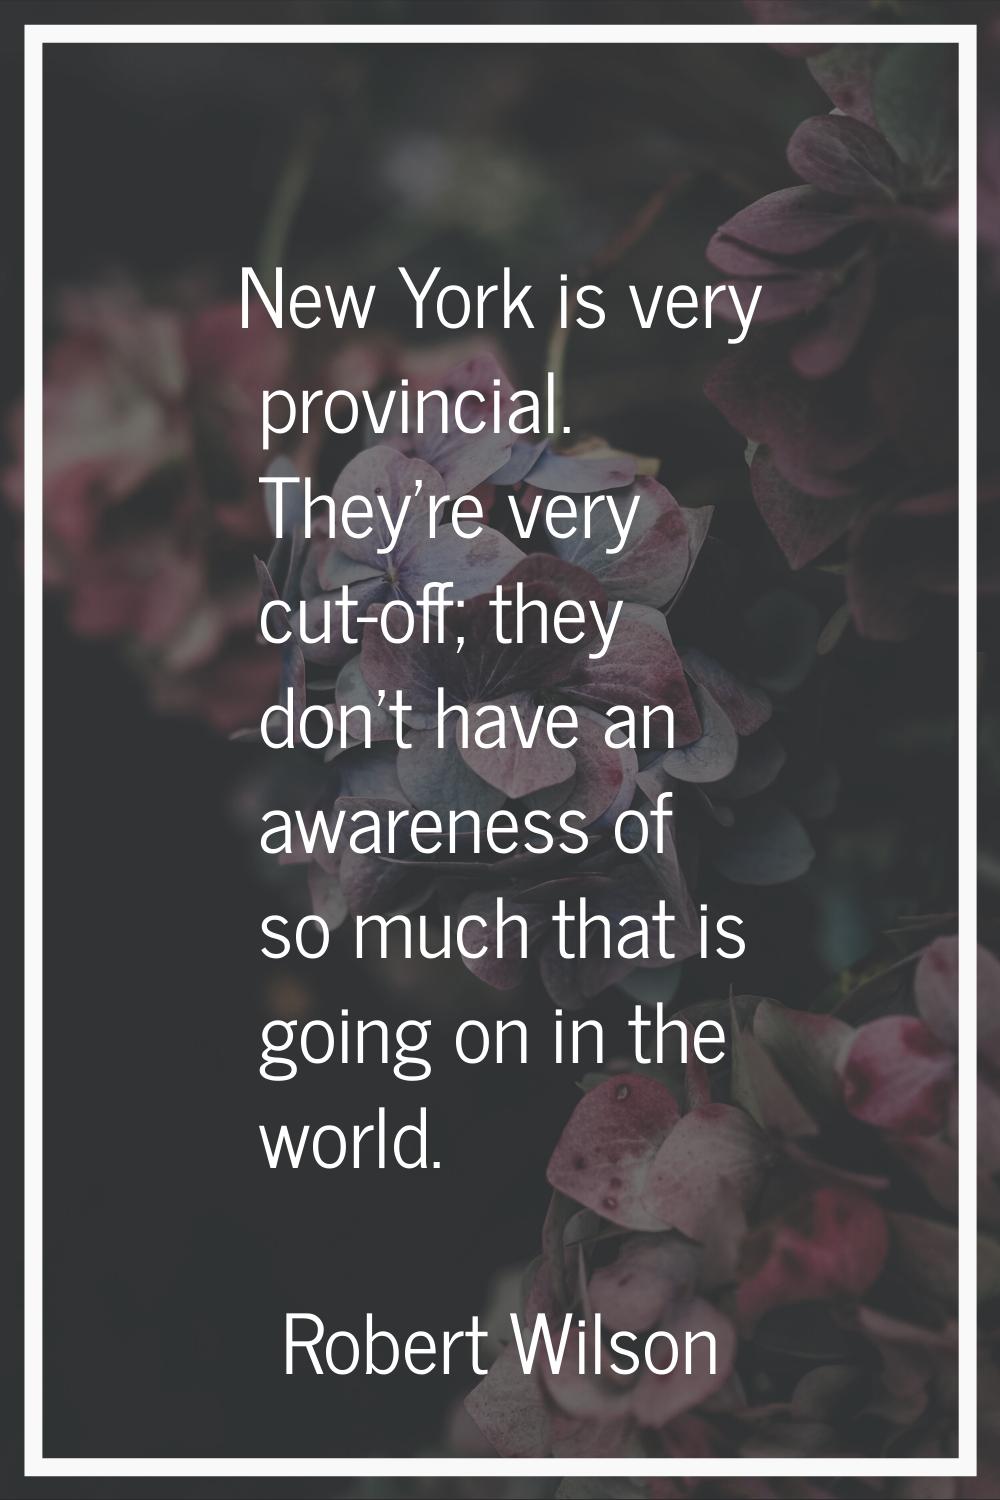 New York is very provincial. They're very cut-off; they don't have an awareness of so much that is 